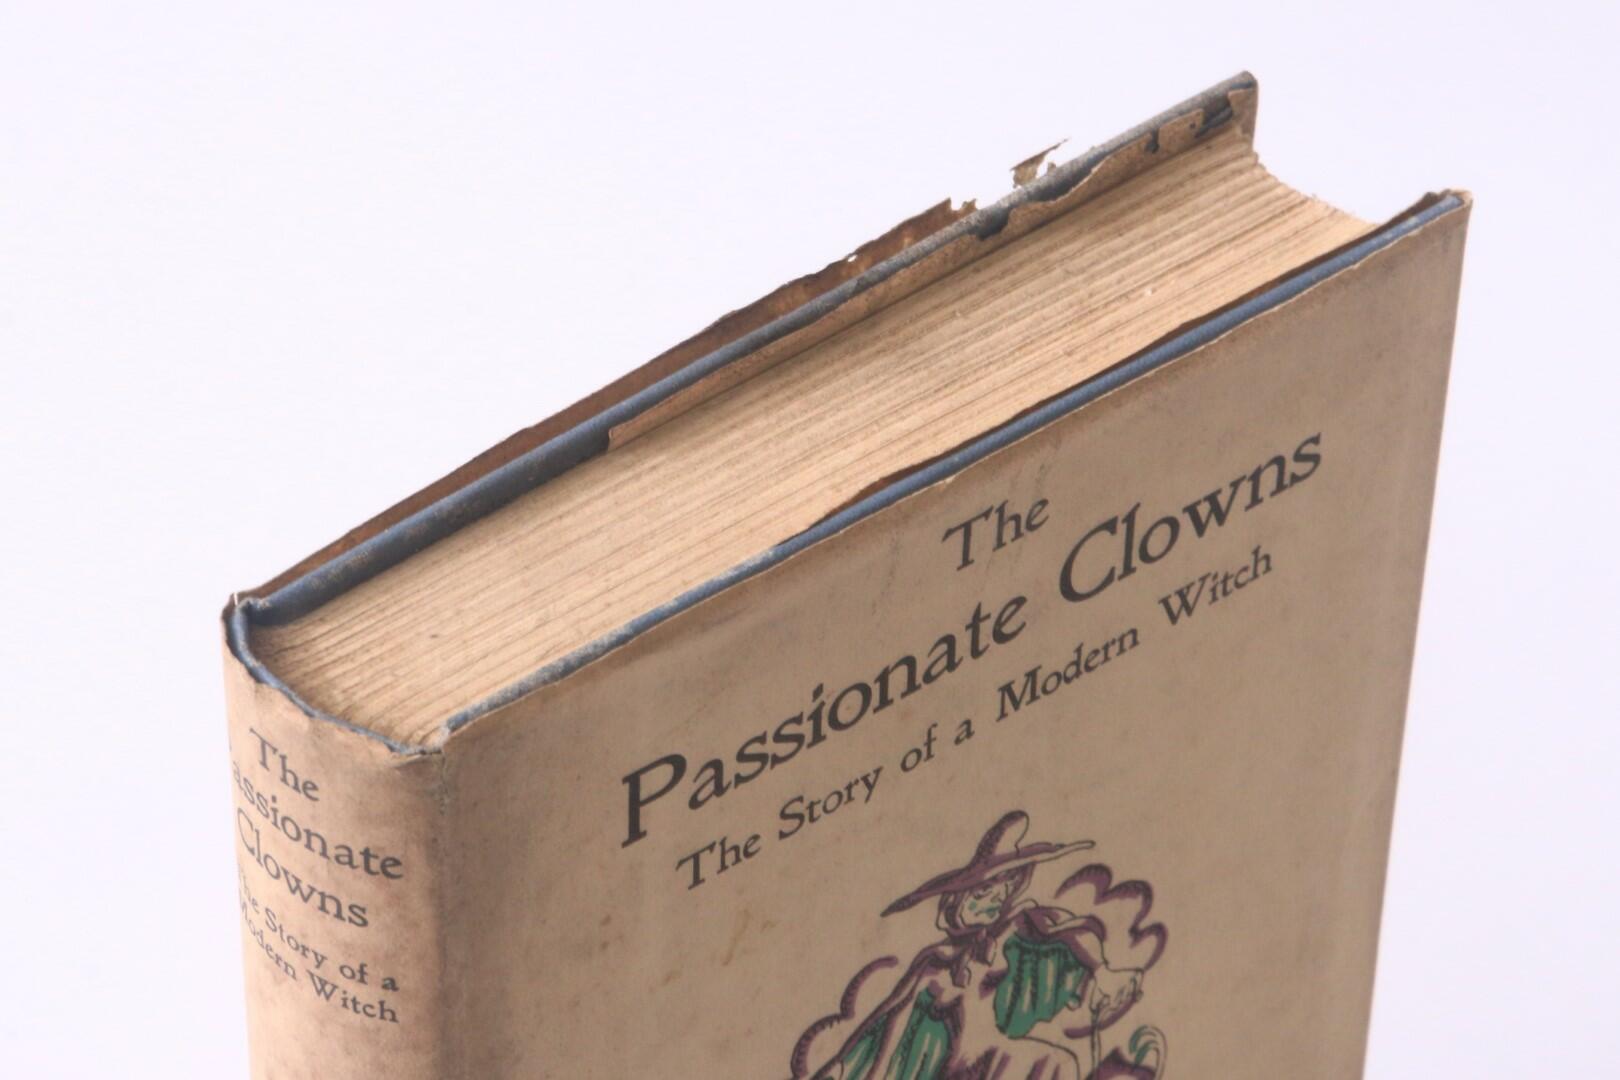 Holt Marvell [Eric Maschwitz] - The Passionate Clowns: The Story of a Modern Witch - Duckworth, 1927, First Edition.